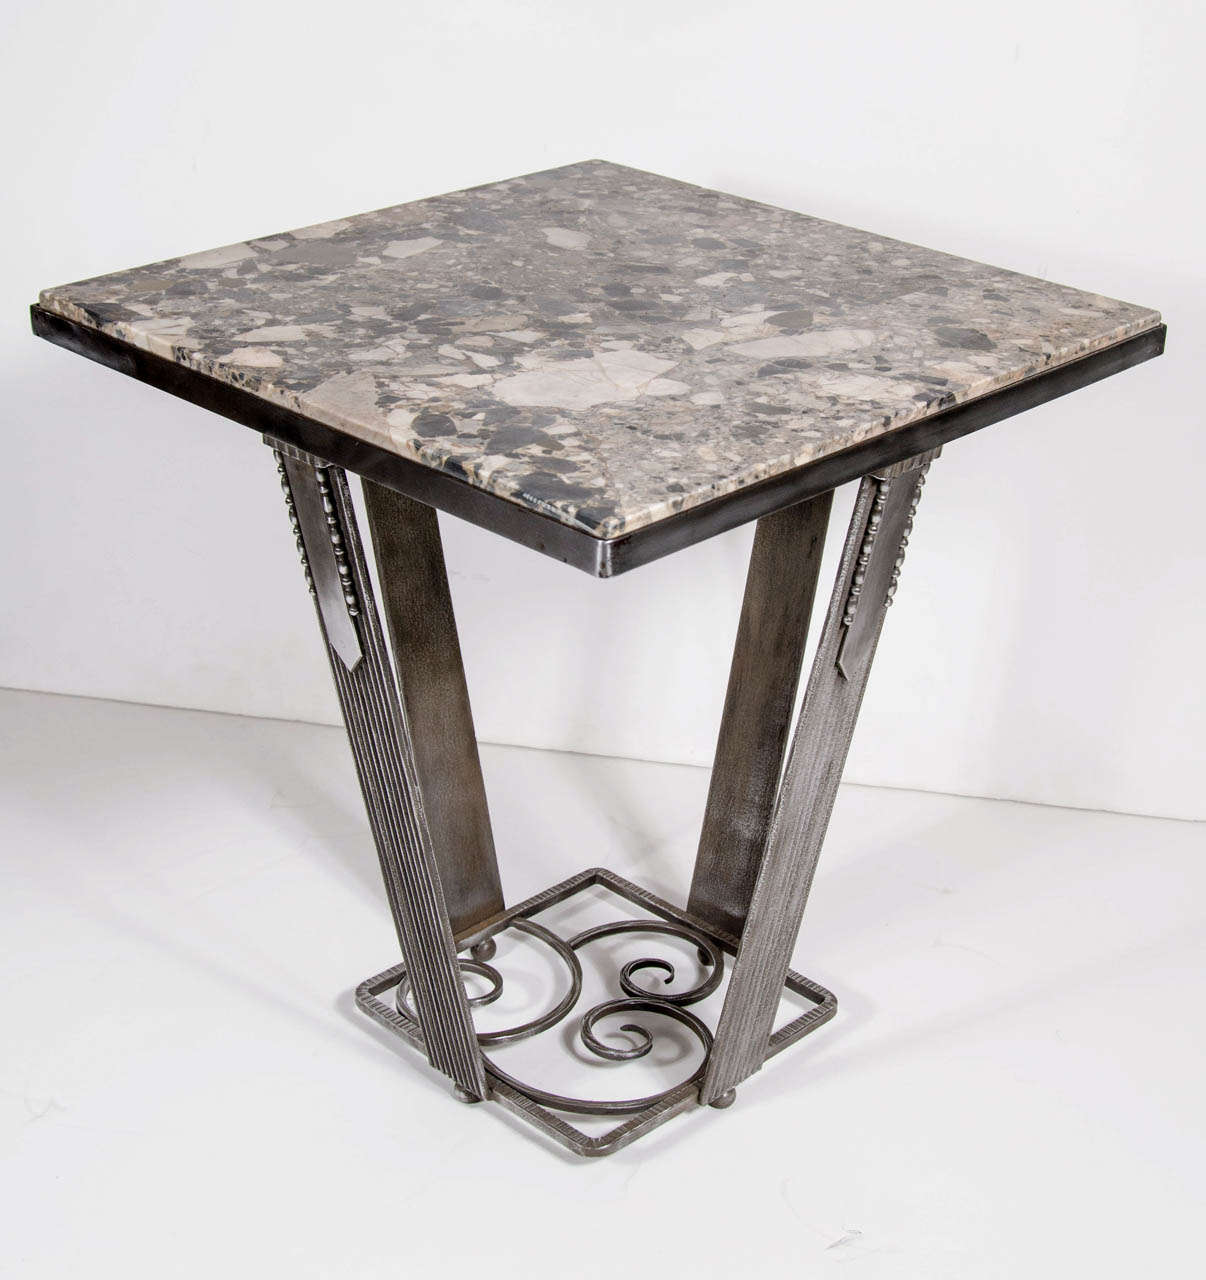 This exquisite table features a exotic marble top in shades of grey and creme resting on a hand wrought iron base . The base features fluted ribbed Art deco detailing with stylized circular accents.The tones of this stunning marble with the tones of